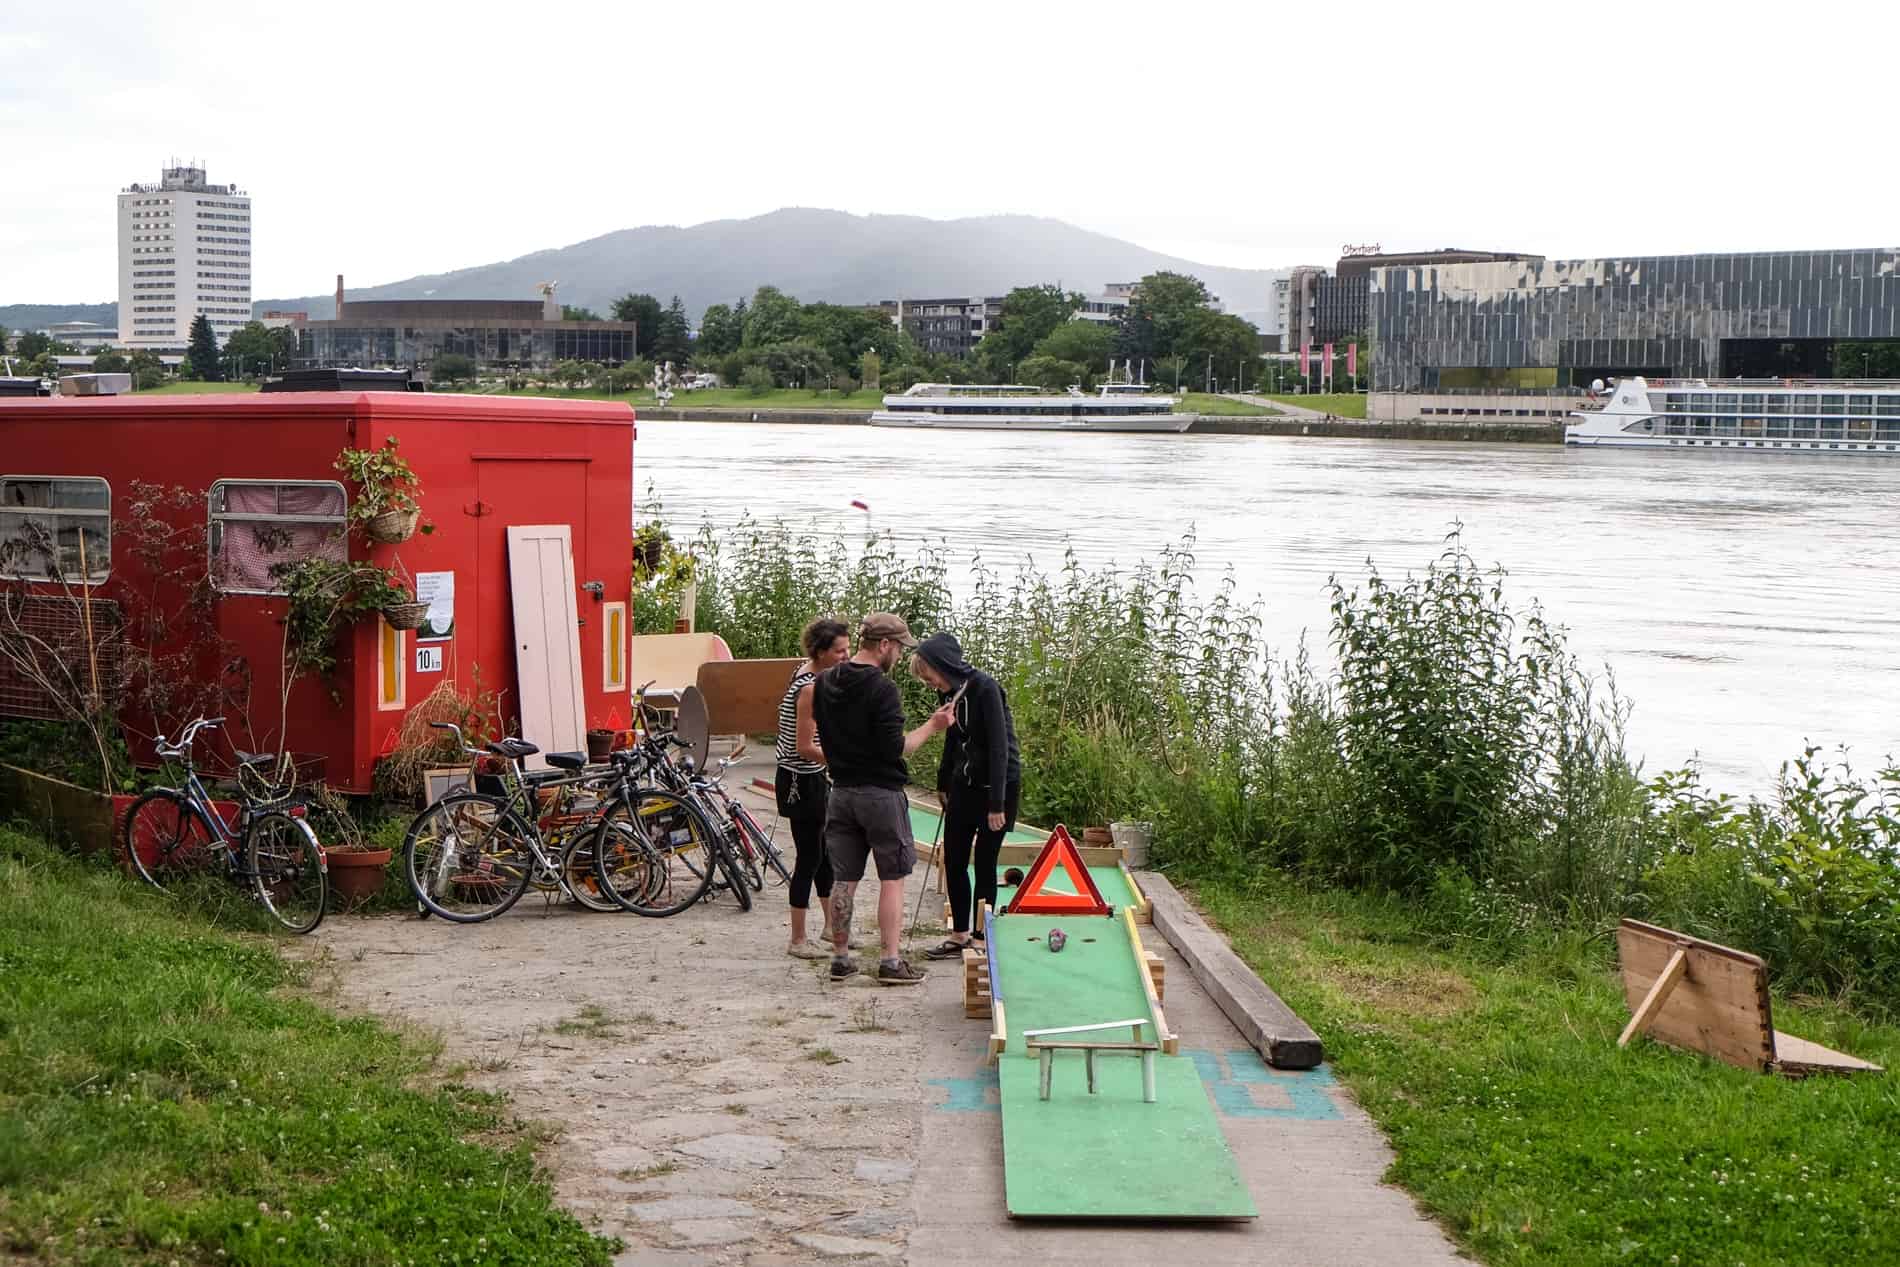 People standing between a red cafe van and green crazy golf game on the Danube river bank in Linz, Austria. 